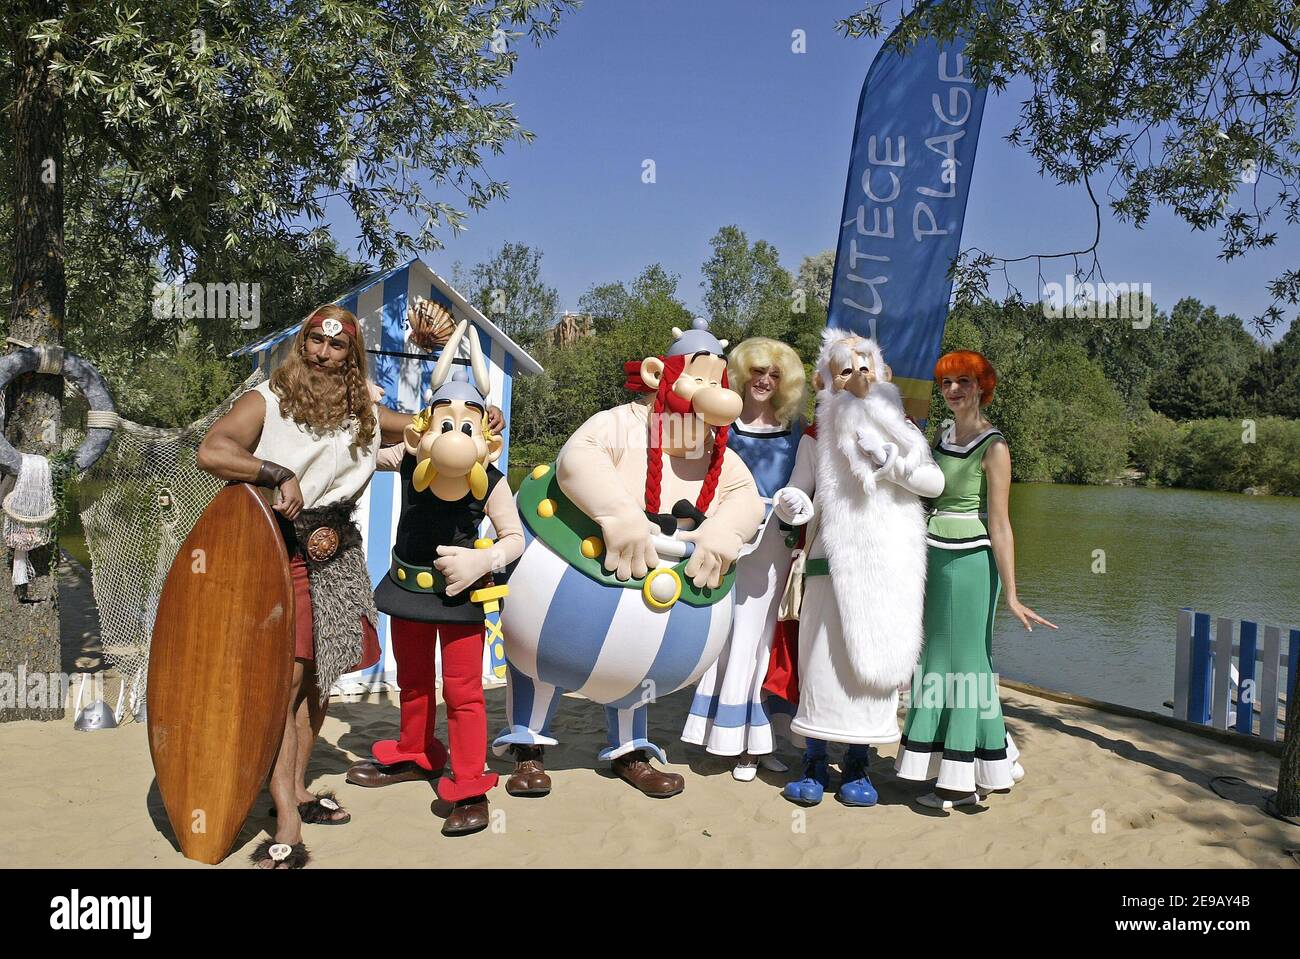 Asterix,Obelix,Panoramix, Falbala and Bonemine attend the new attraction 'The vikings are disembarking' at Park Asterix in Plailly near Paris, France on June 17, 2006. Photo by Edouard Bernaux/ABACAPRESS.COM Stock Photo